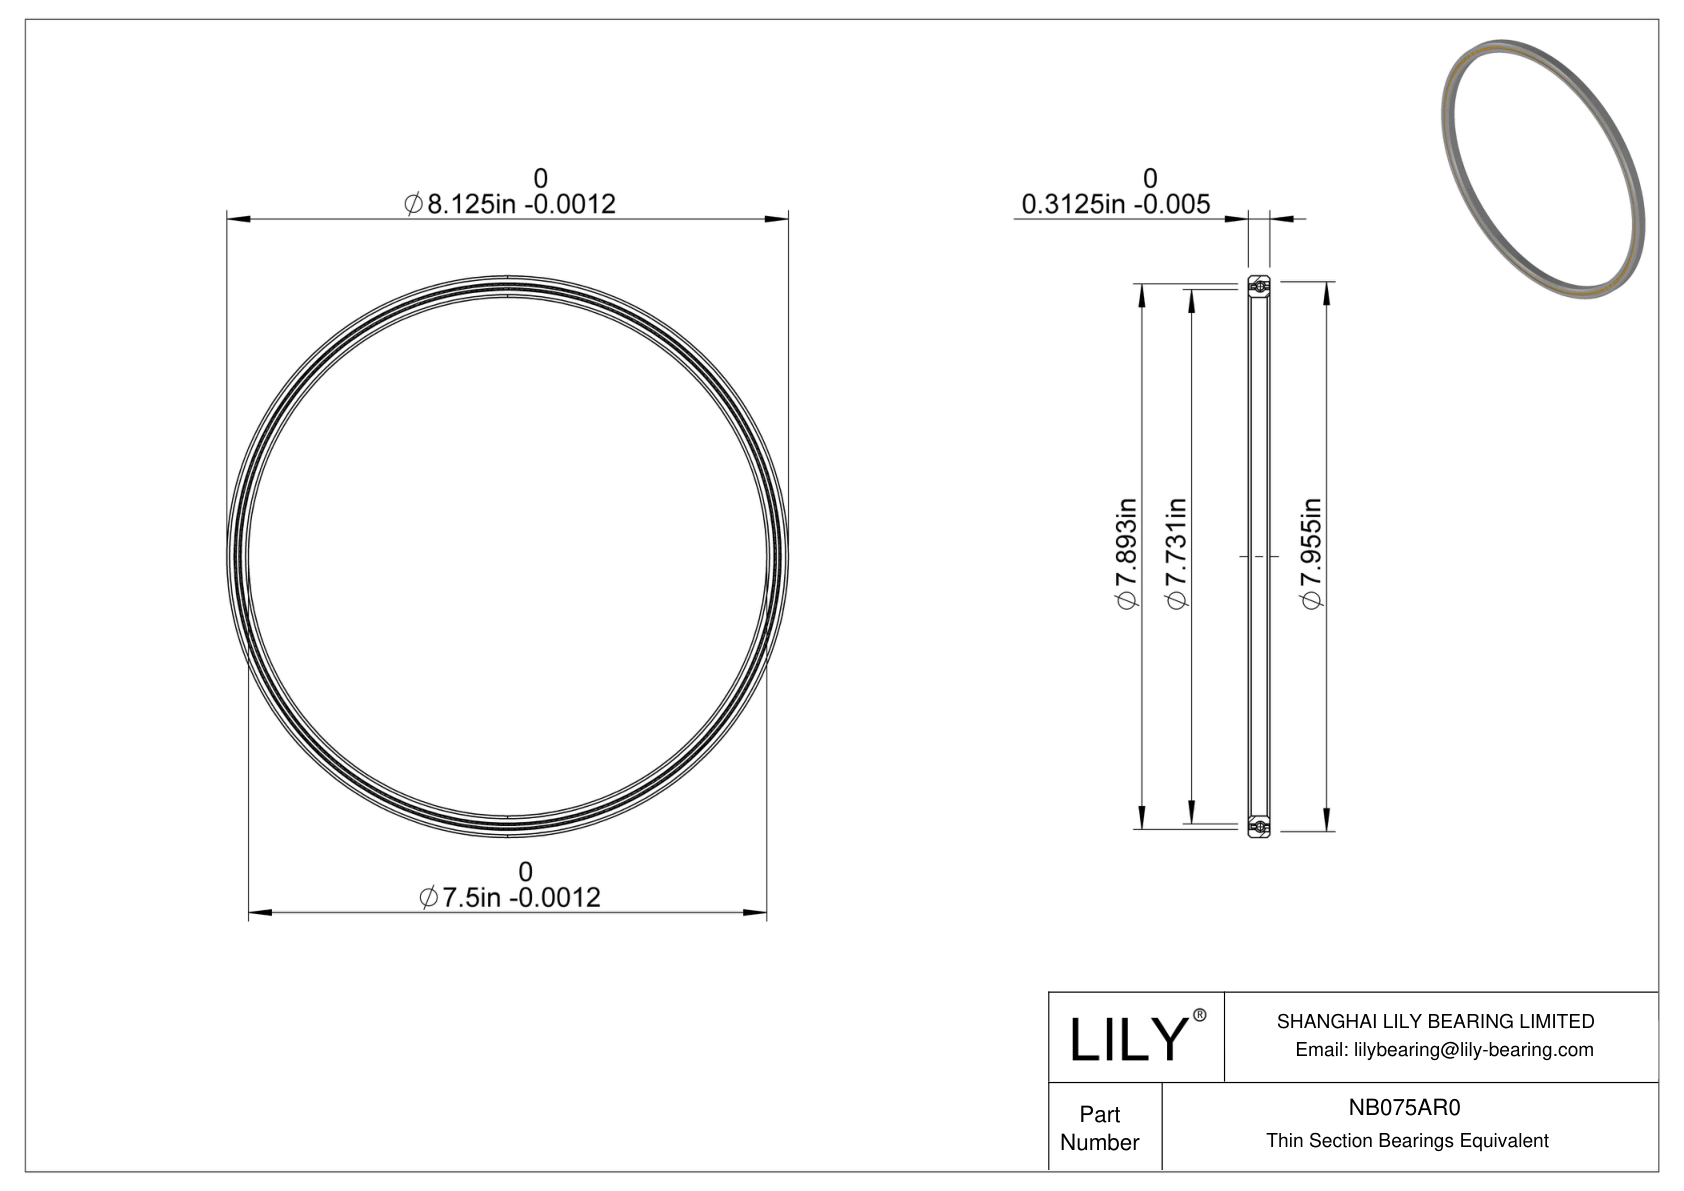 NB075AR0 Constant Section (CS) Bearings cad drawing